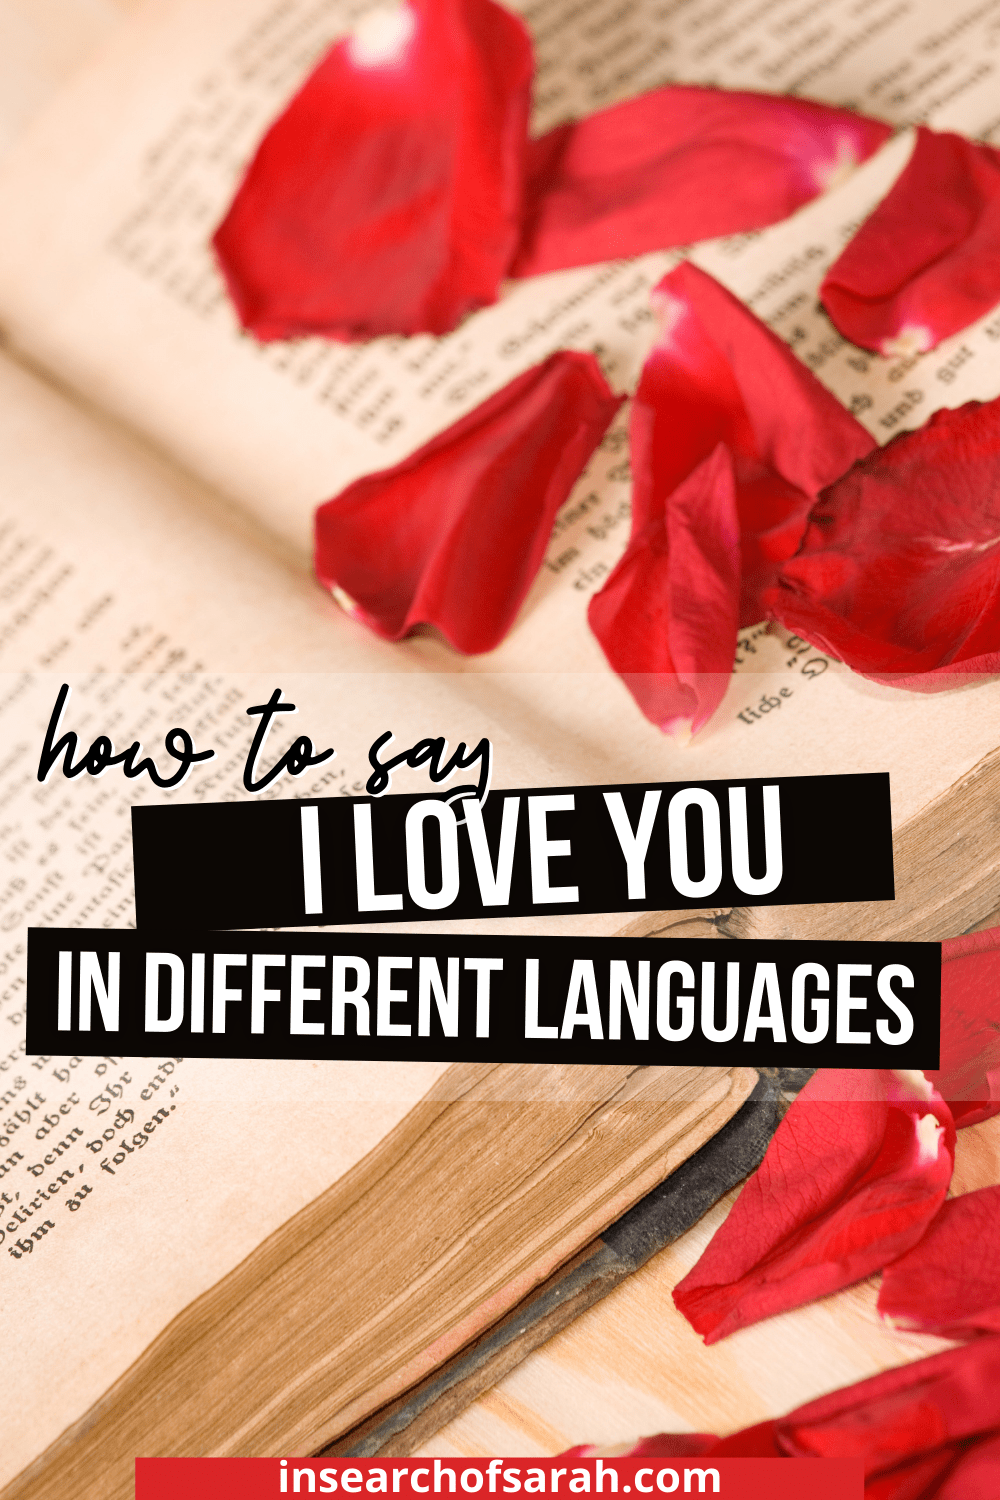 how to say I love you different languages